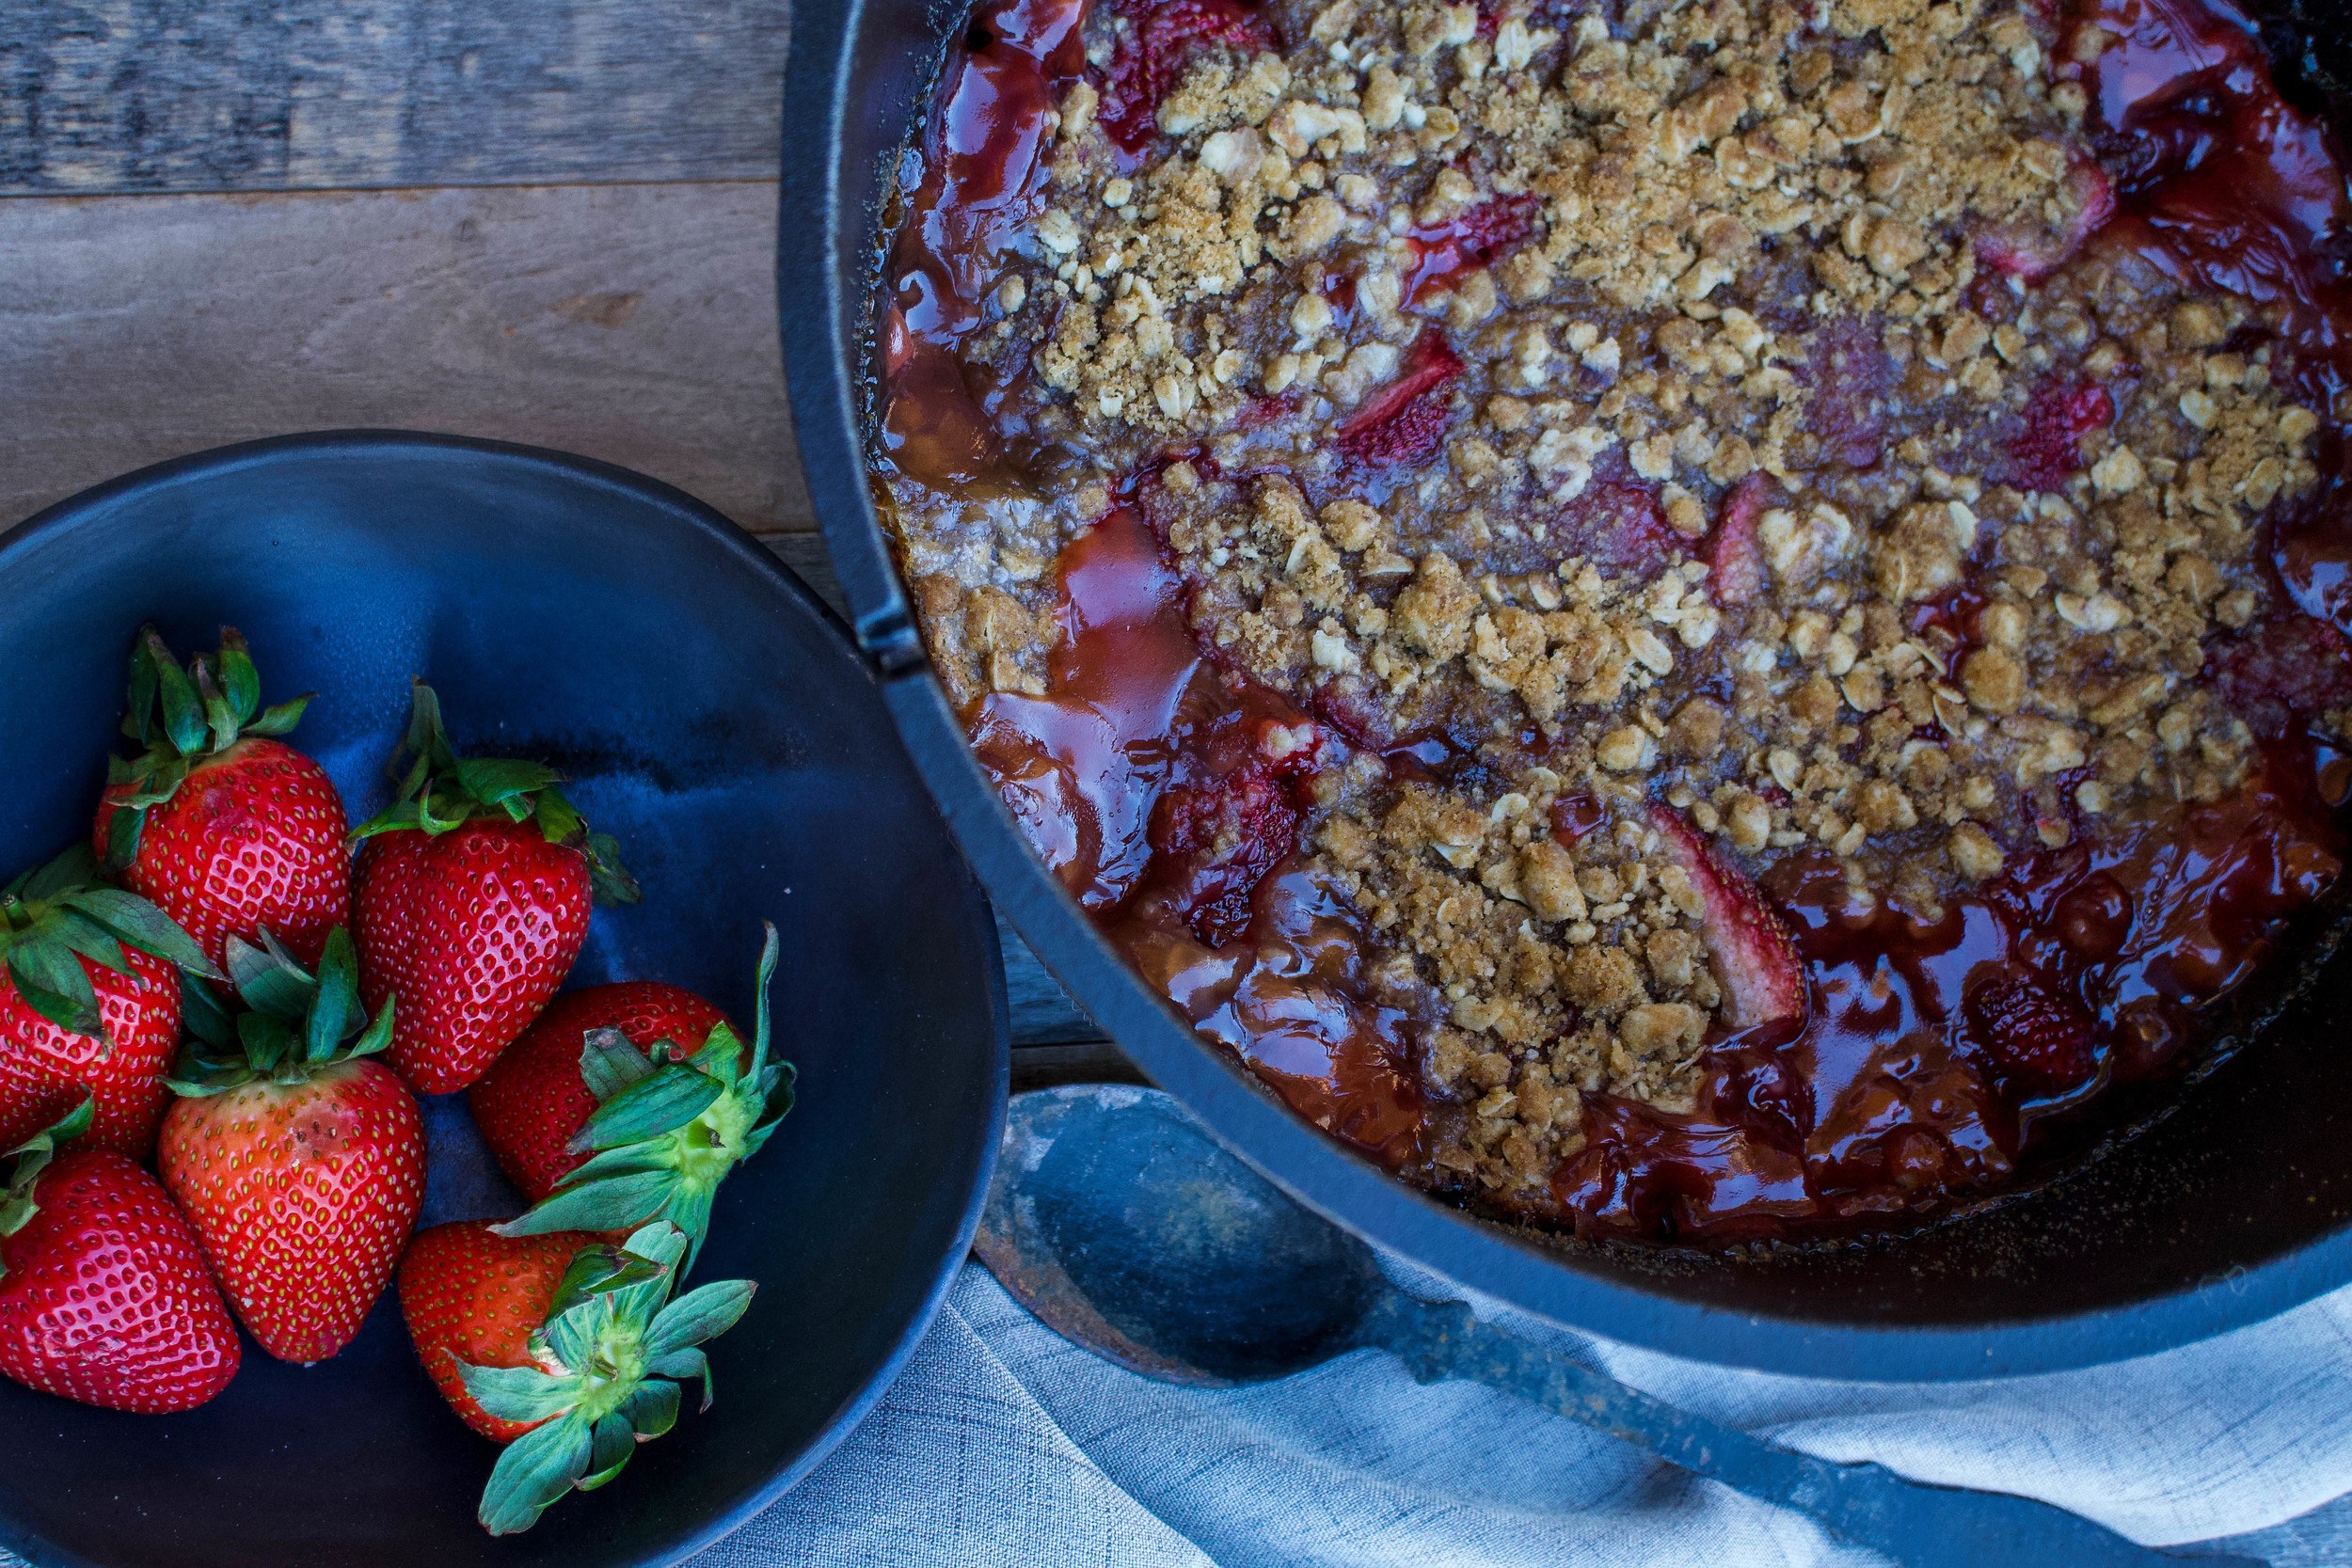 Strawberry Rhubarb Crisp recipe perfect for Dutch oven outdoors or bake indoors